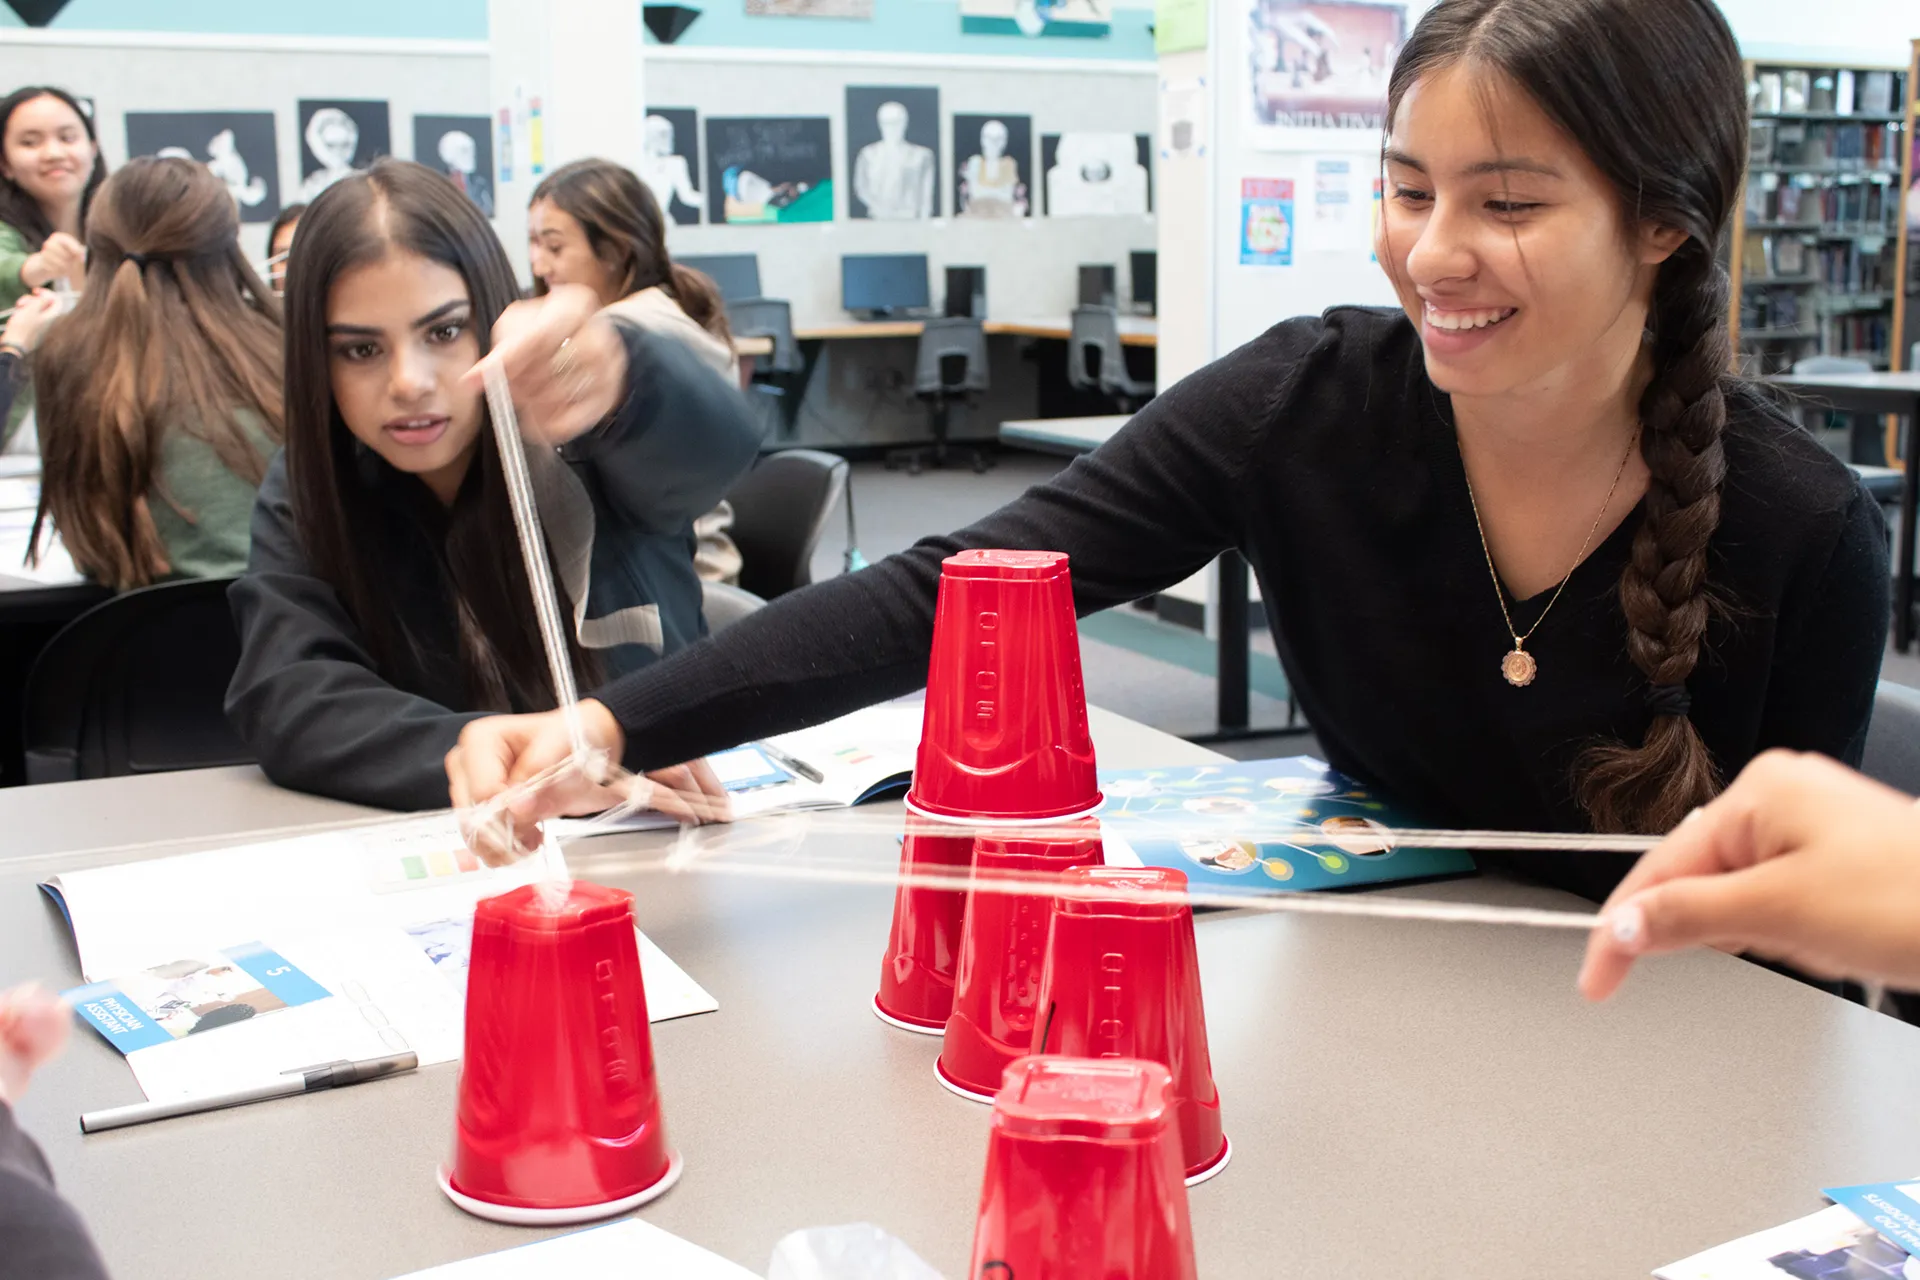 Young women doing an activity with plastic cups and rubber bands on table